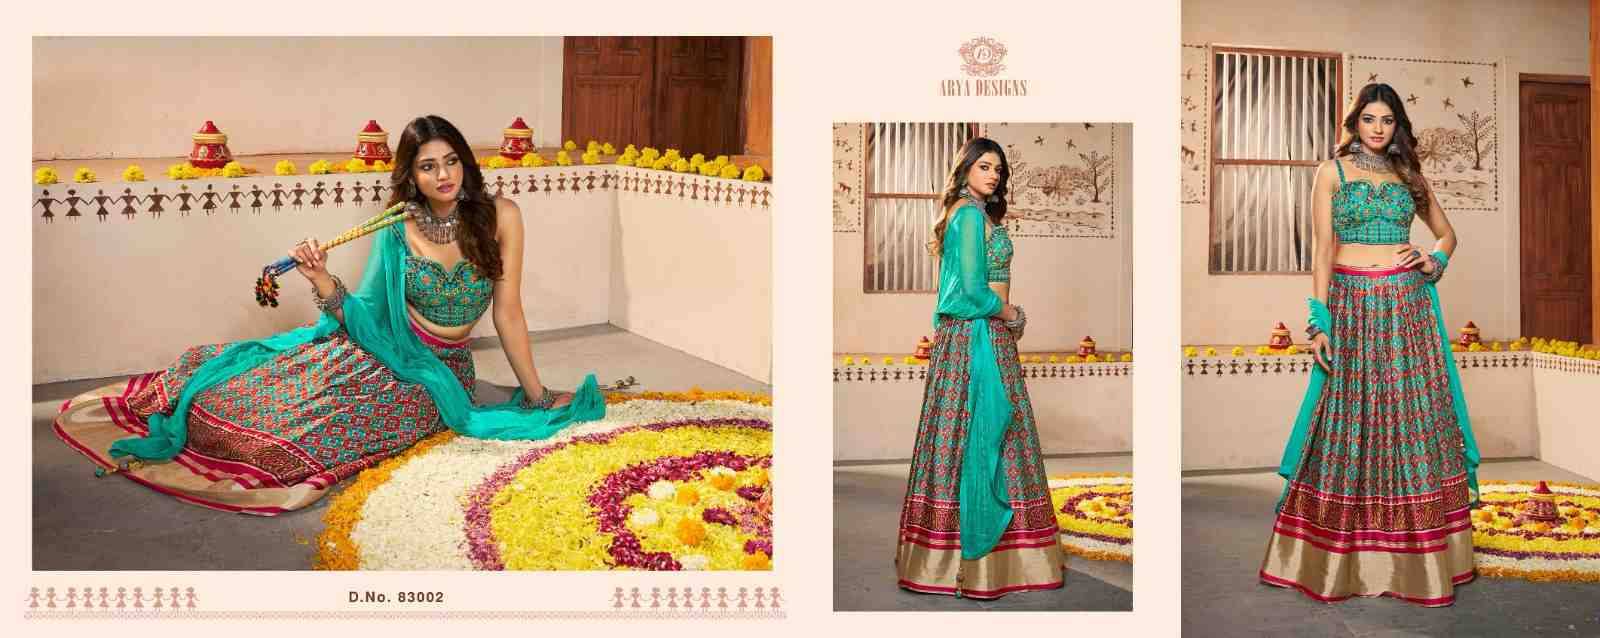 Ramzat By Arya Designs 83001 To 83006 Series Bridal Wear Collection Beautiful Stylish Colorful Fancy Party Wear & Occasional Wear Silk Lehengas At Wholesale Price